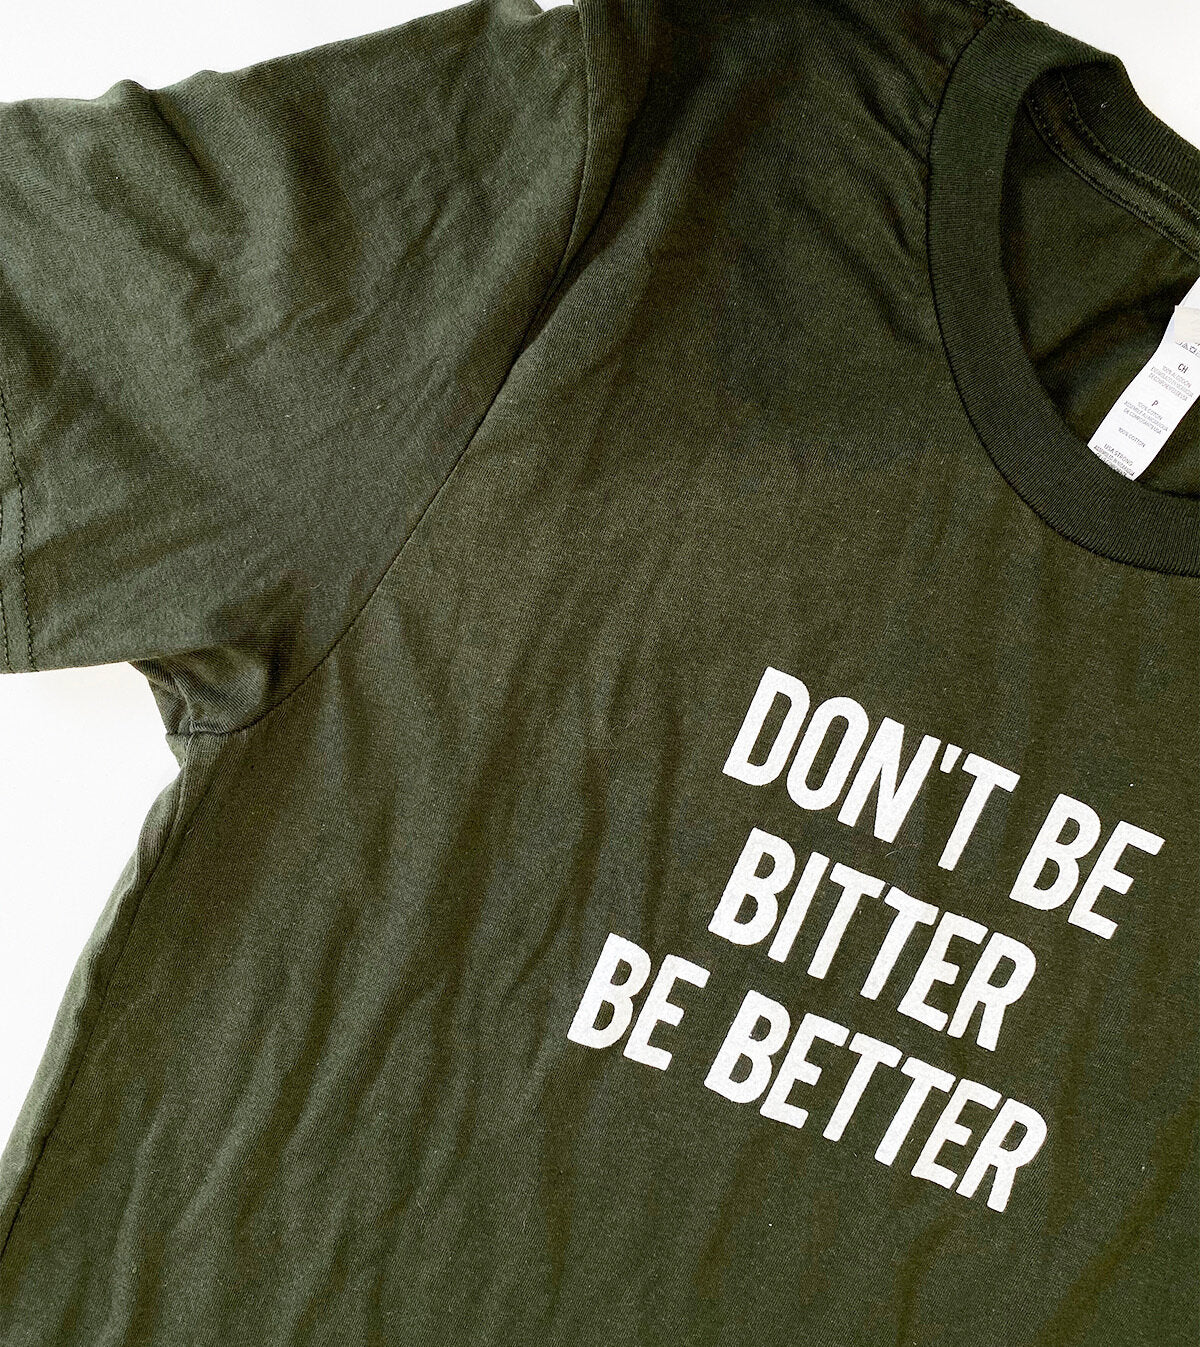 Don’t be Bitter be Better Graphic T-Shirt